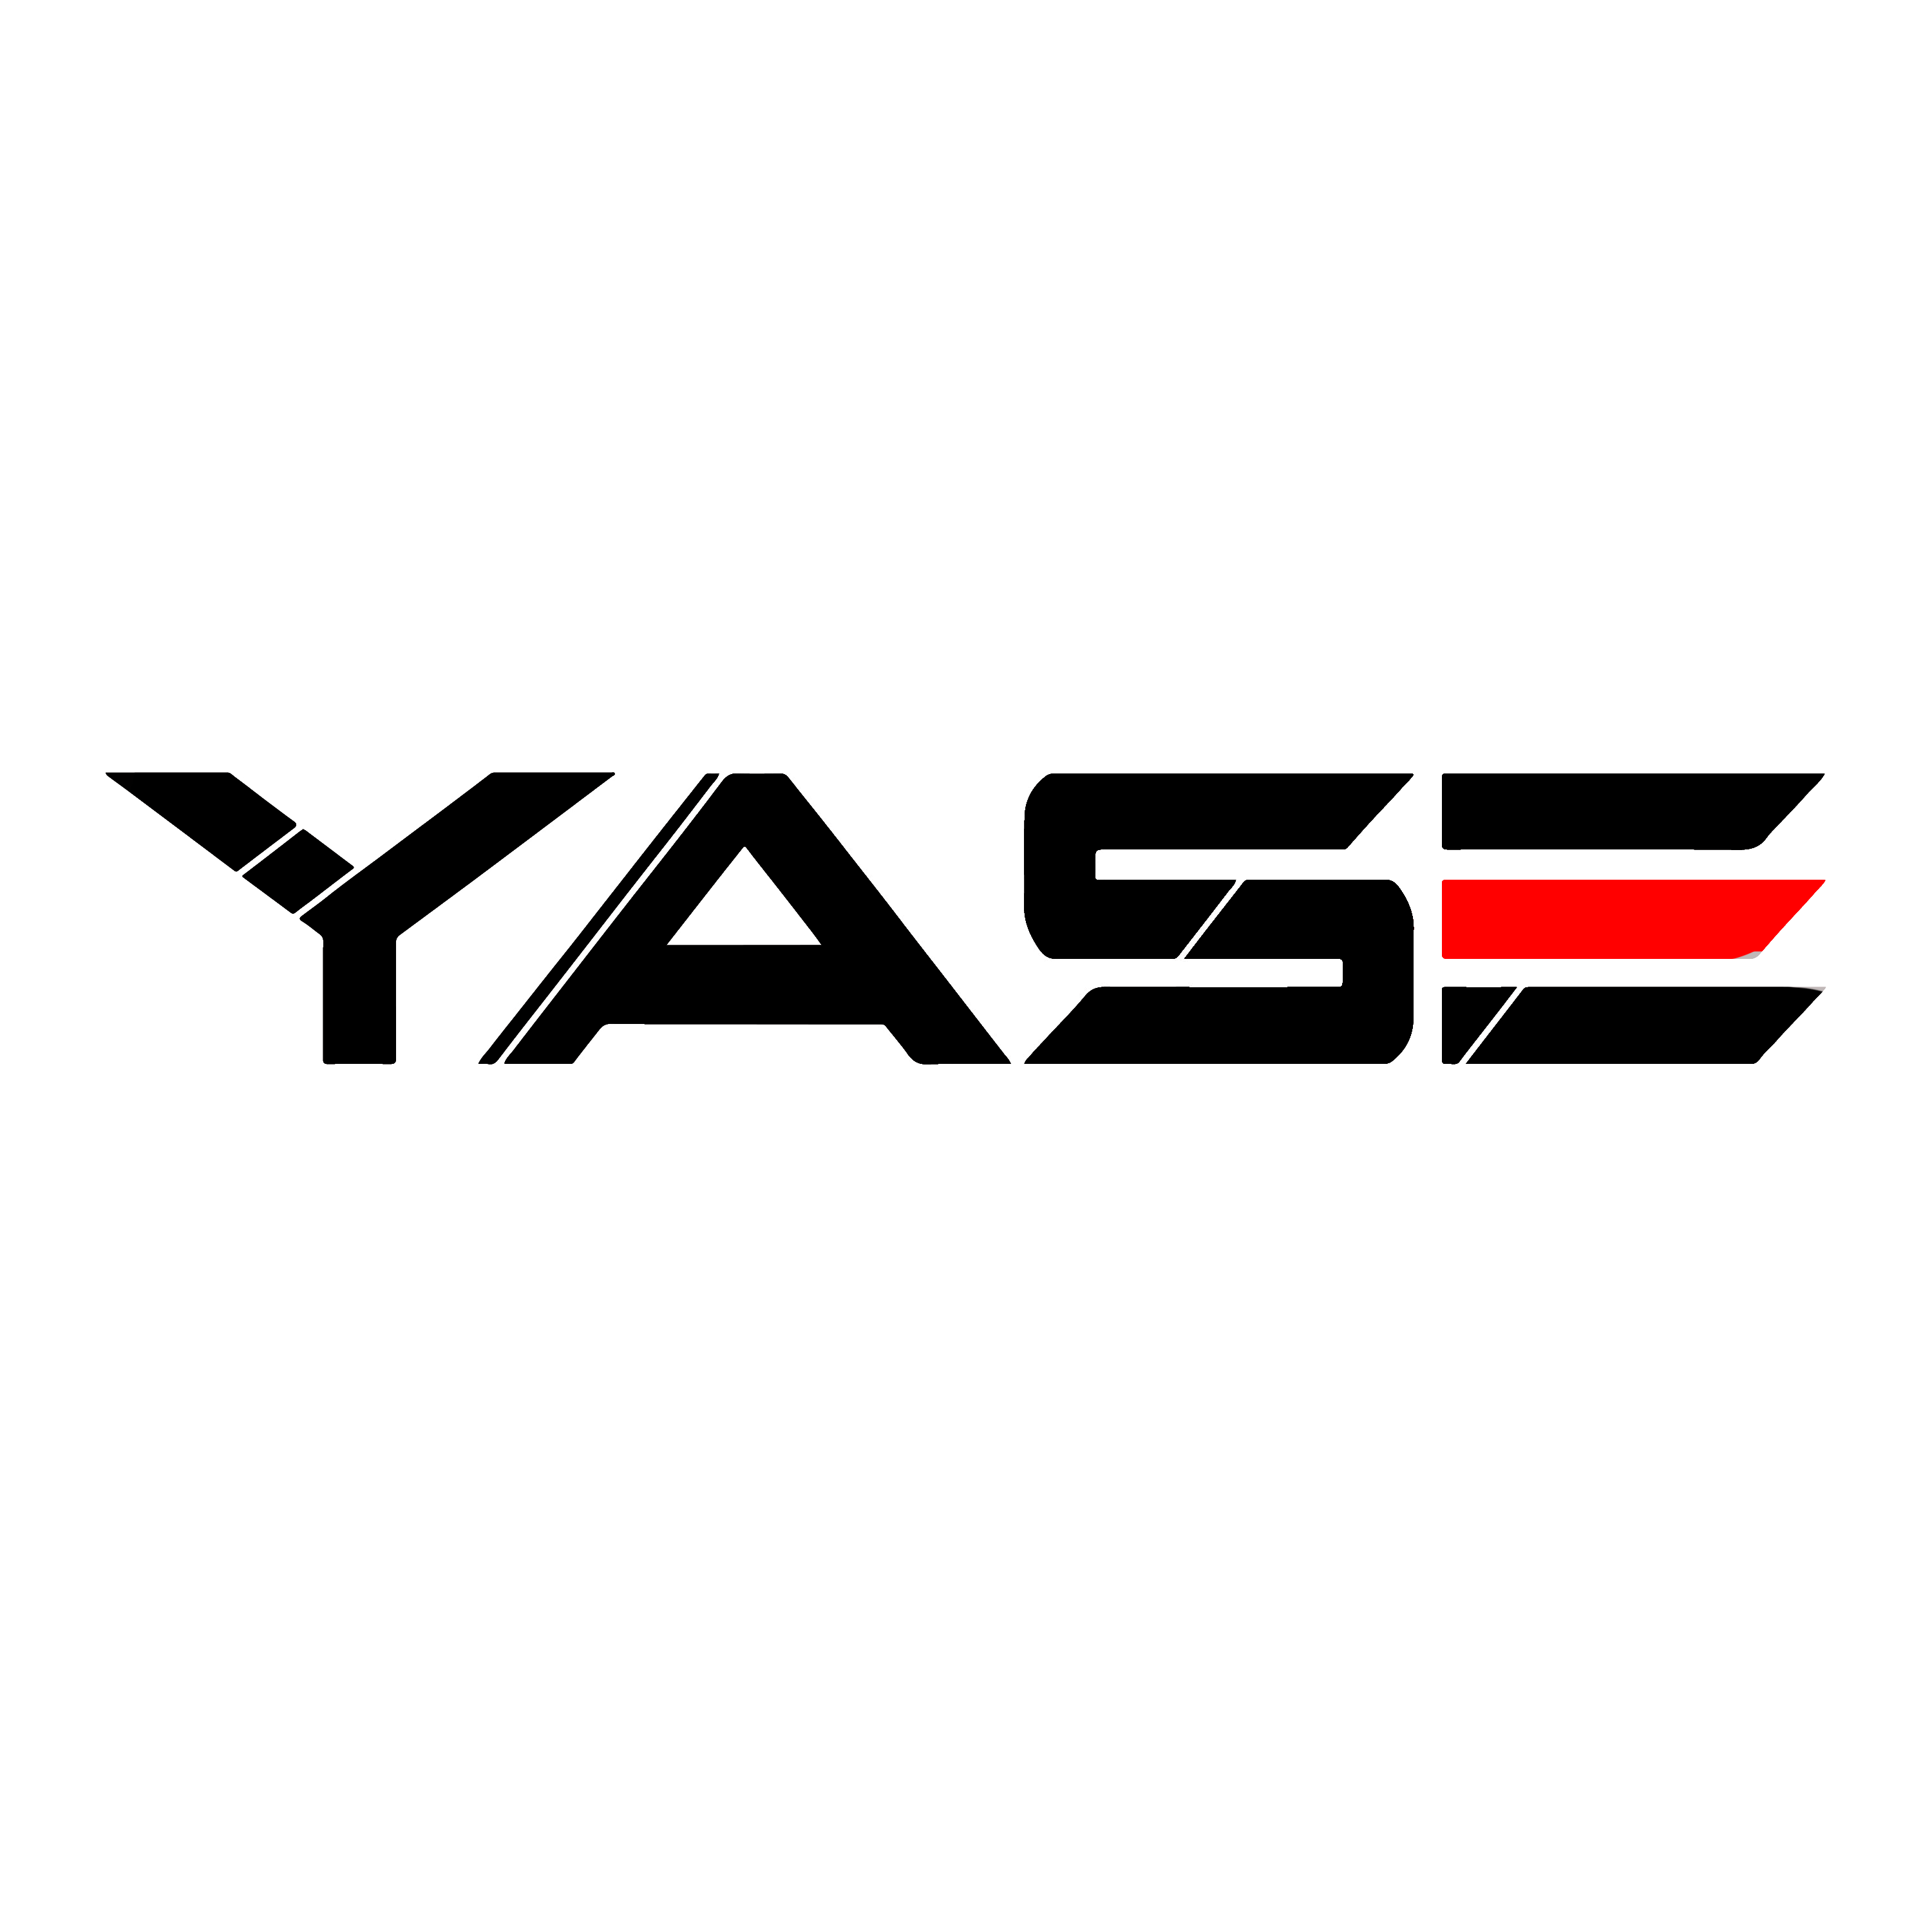 The history and origin of the Yase brand